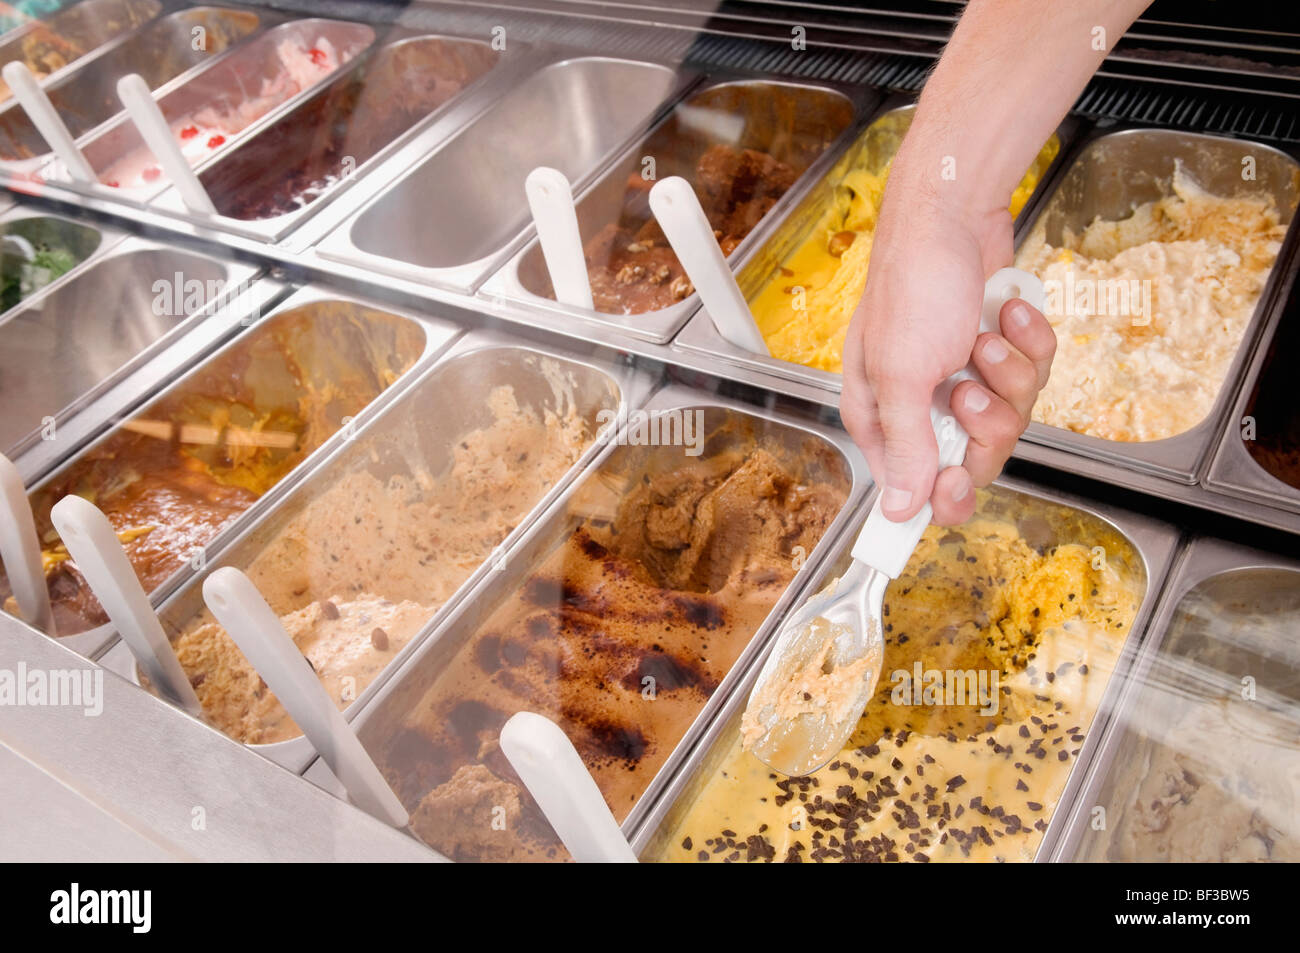 Man's hand taking scoop of ice cream out of container Stock Photo